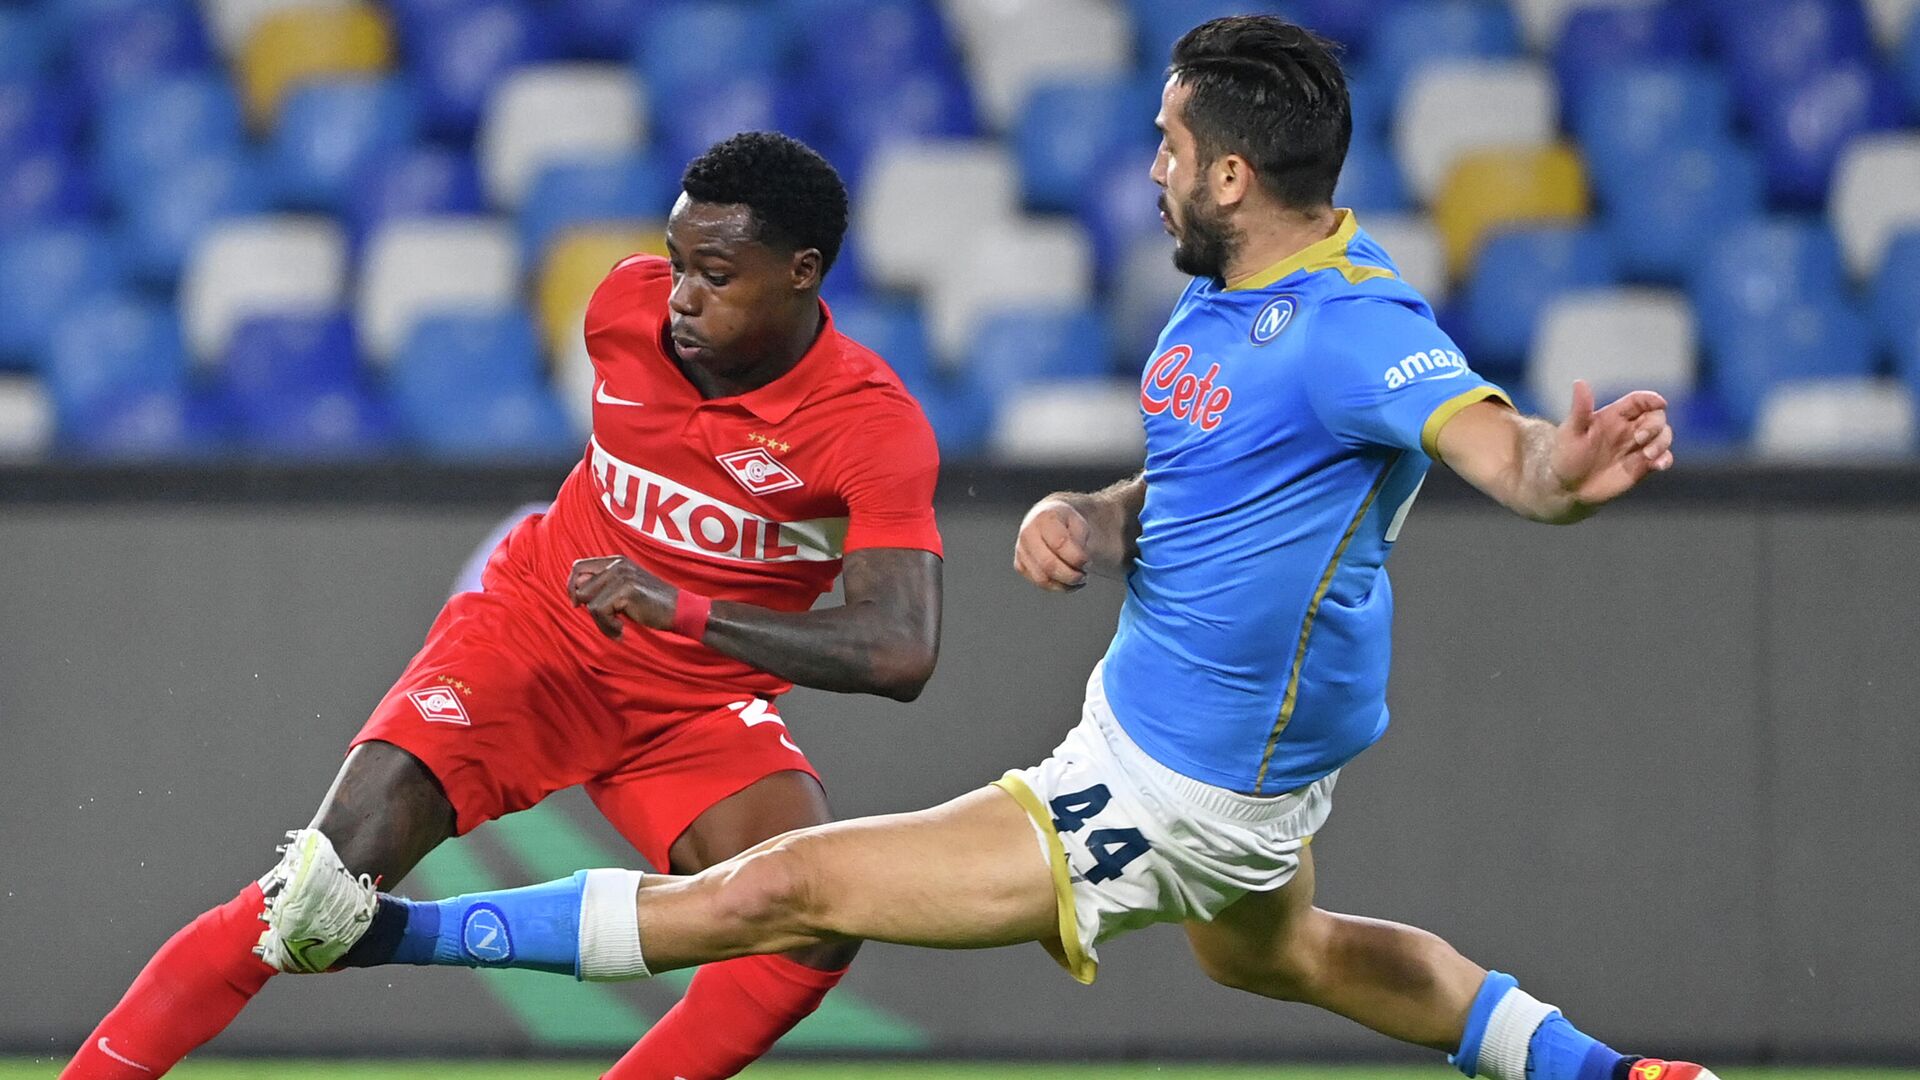 Napoli's Greek defender Konstantinos Manolas (R) goes to tackle Spartak Moscow's Dutch forward Quincy Promes during the UEFA Europa League Group C football match between Napoli and Spartak Moscow on September 30, 2021 at the Diego-Maradona stadium in Naples. (Photo by Alberto PIZZOLI / AFP) - РИА Новости, 1920, 16.12.2021